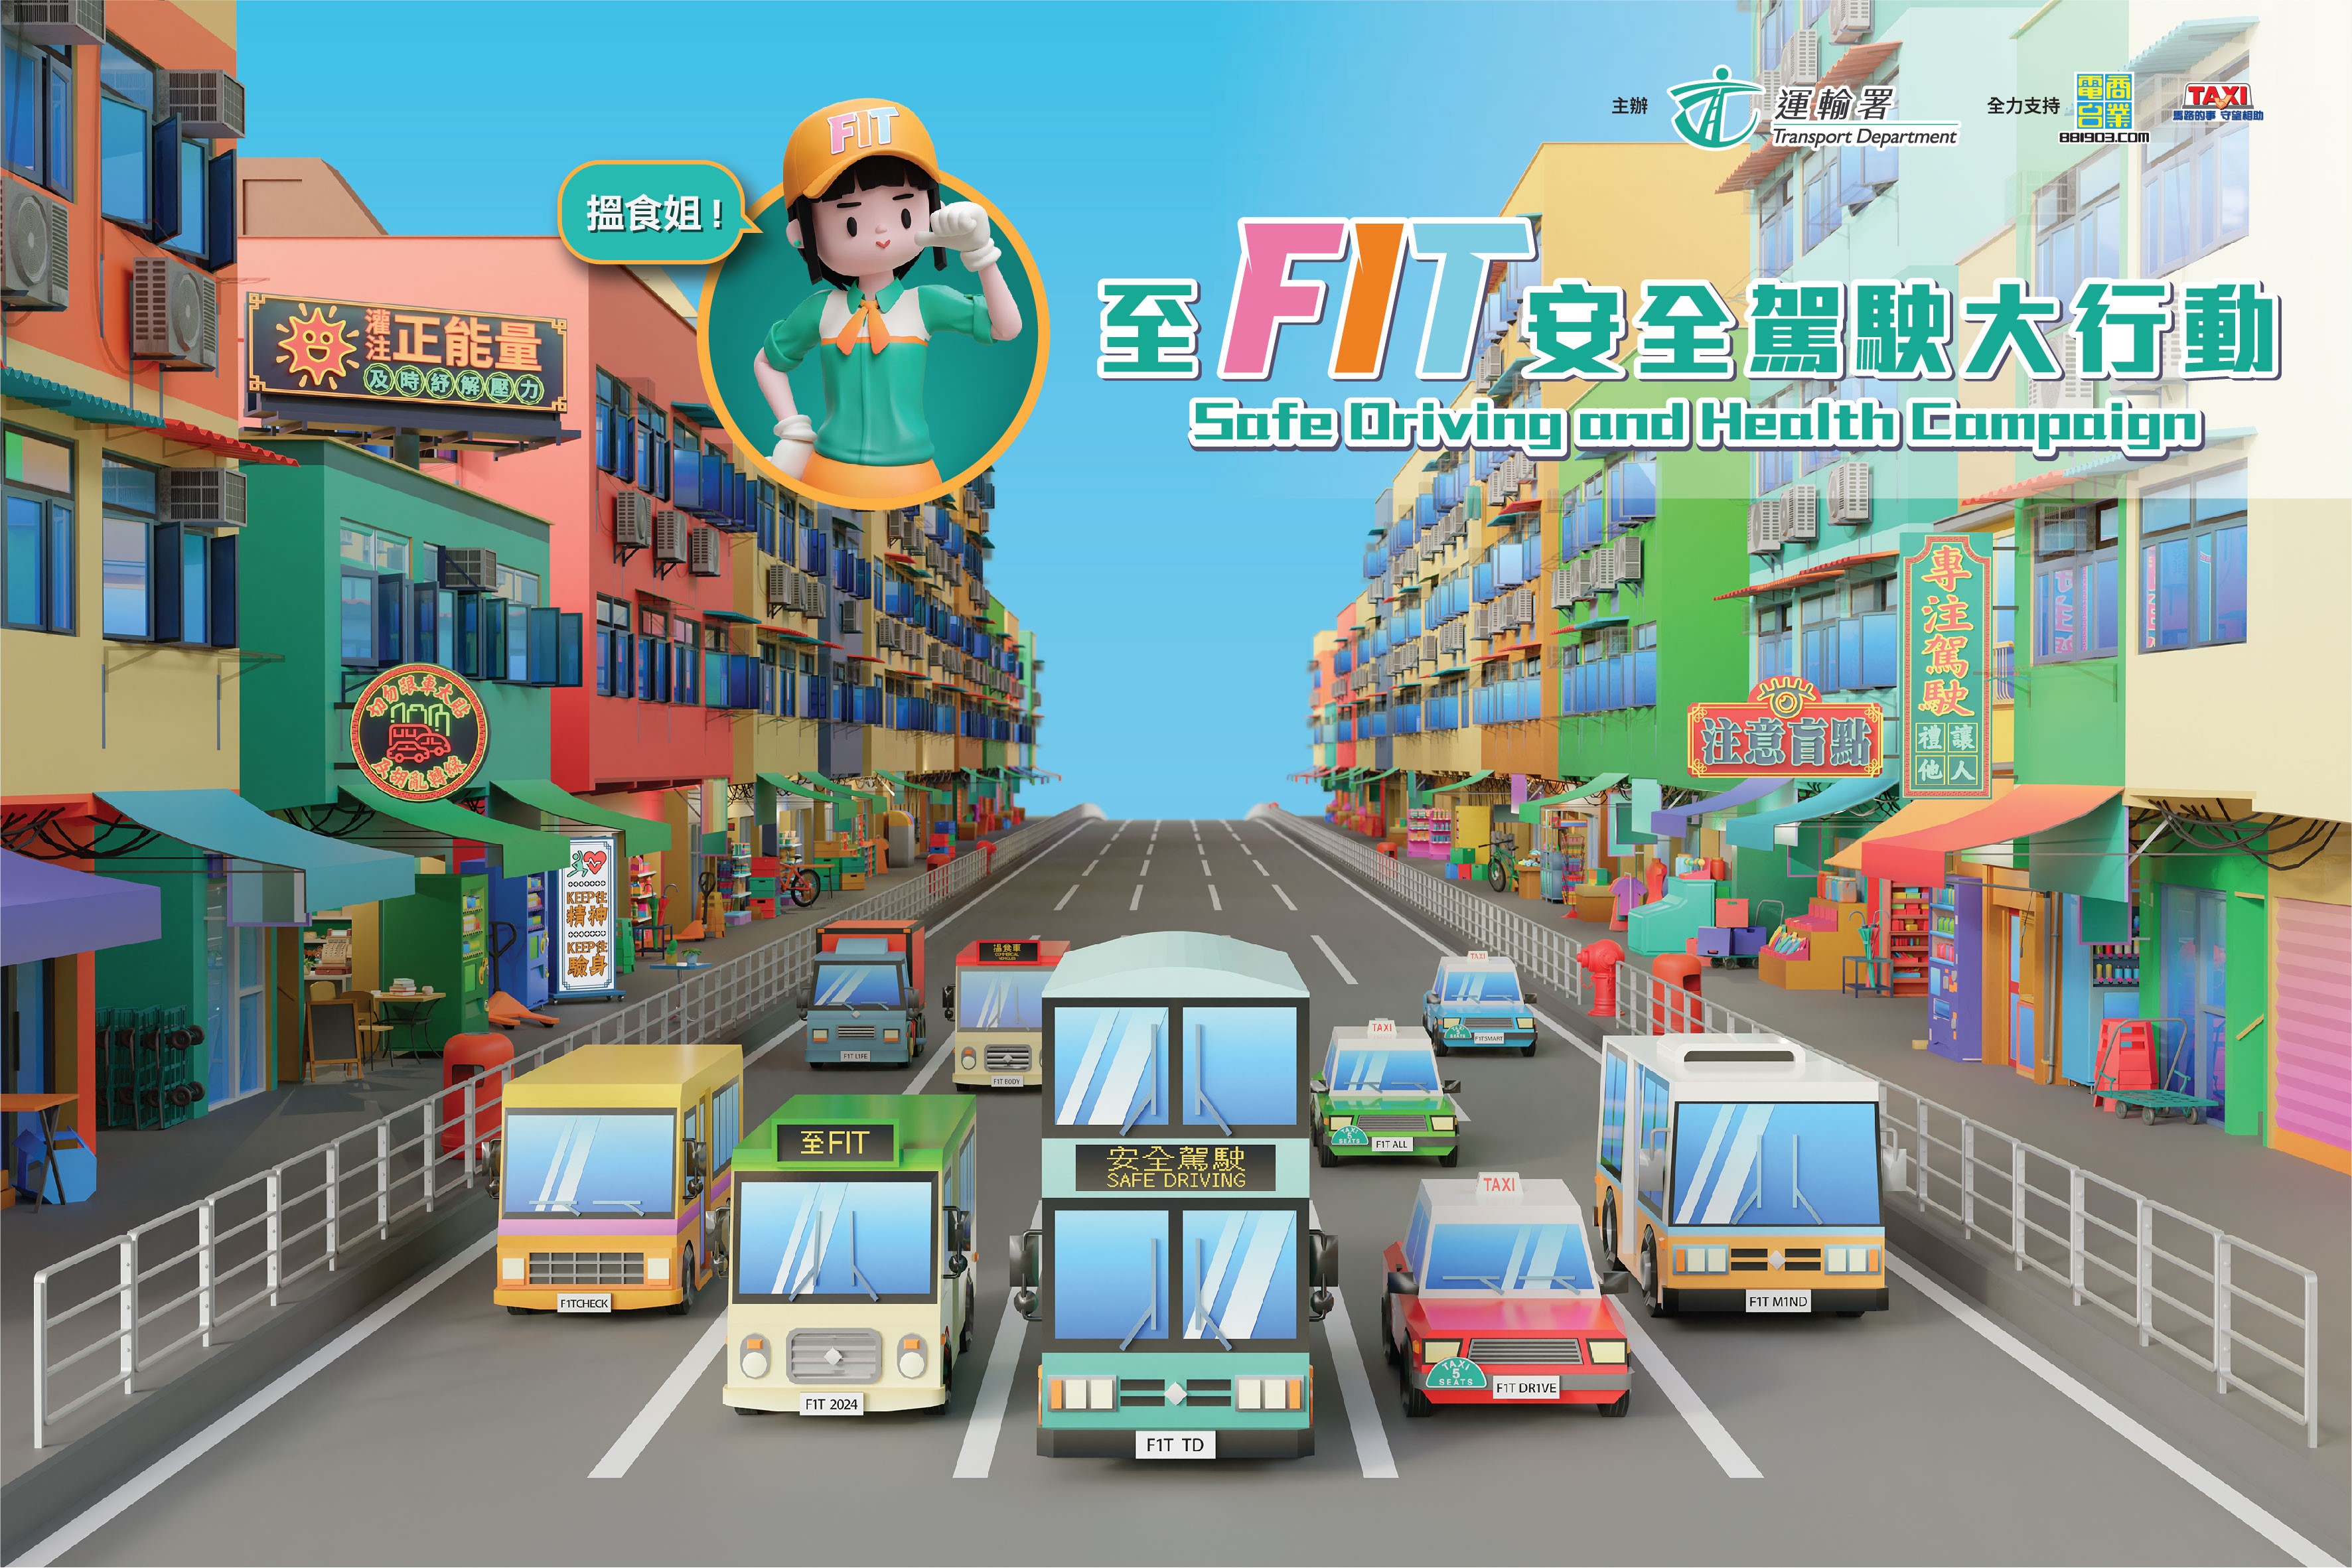 Promotion banner of the Safe Driving and Health Campaign